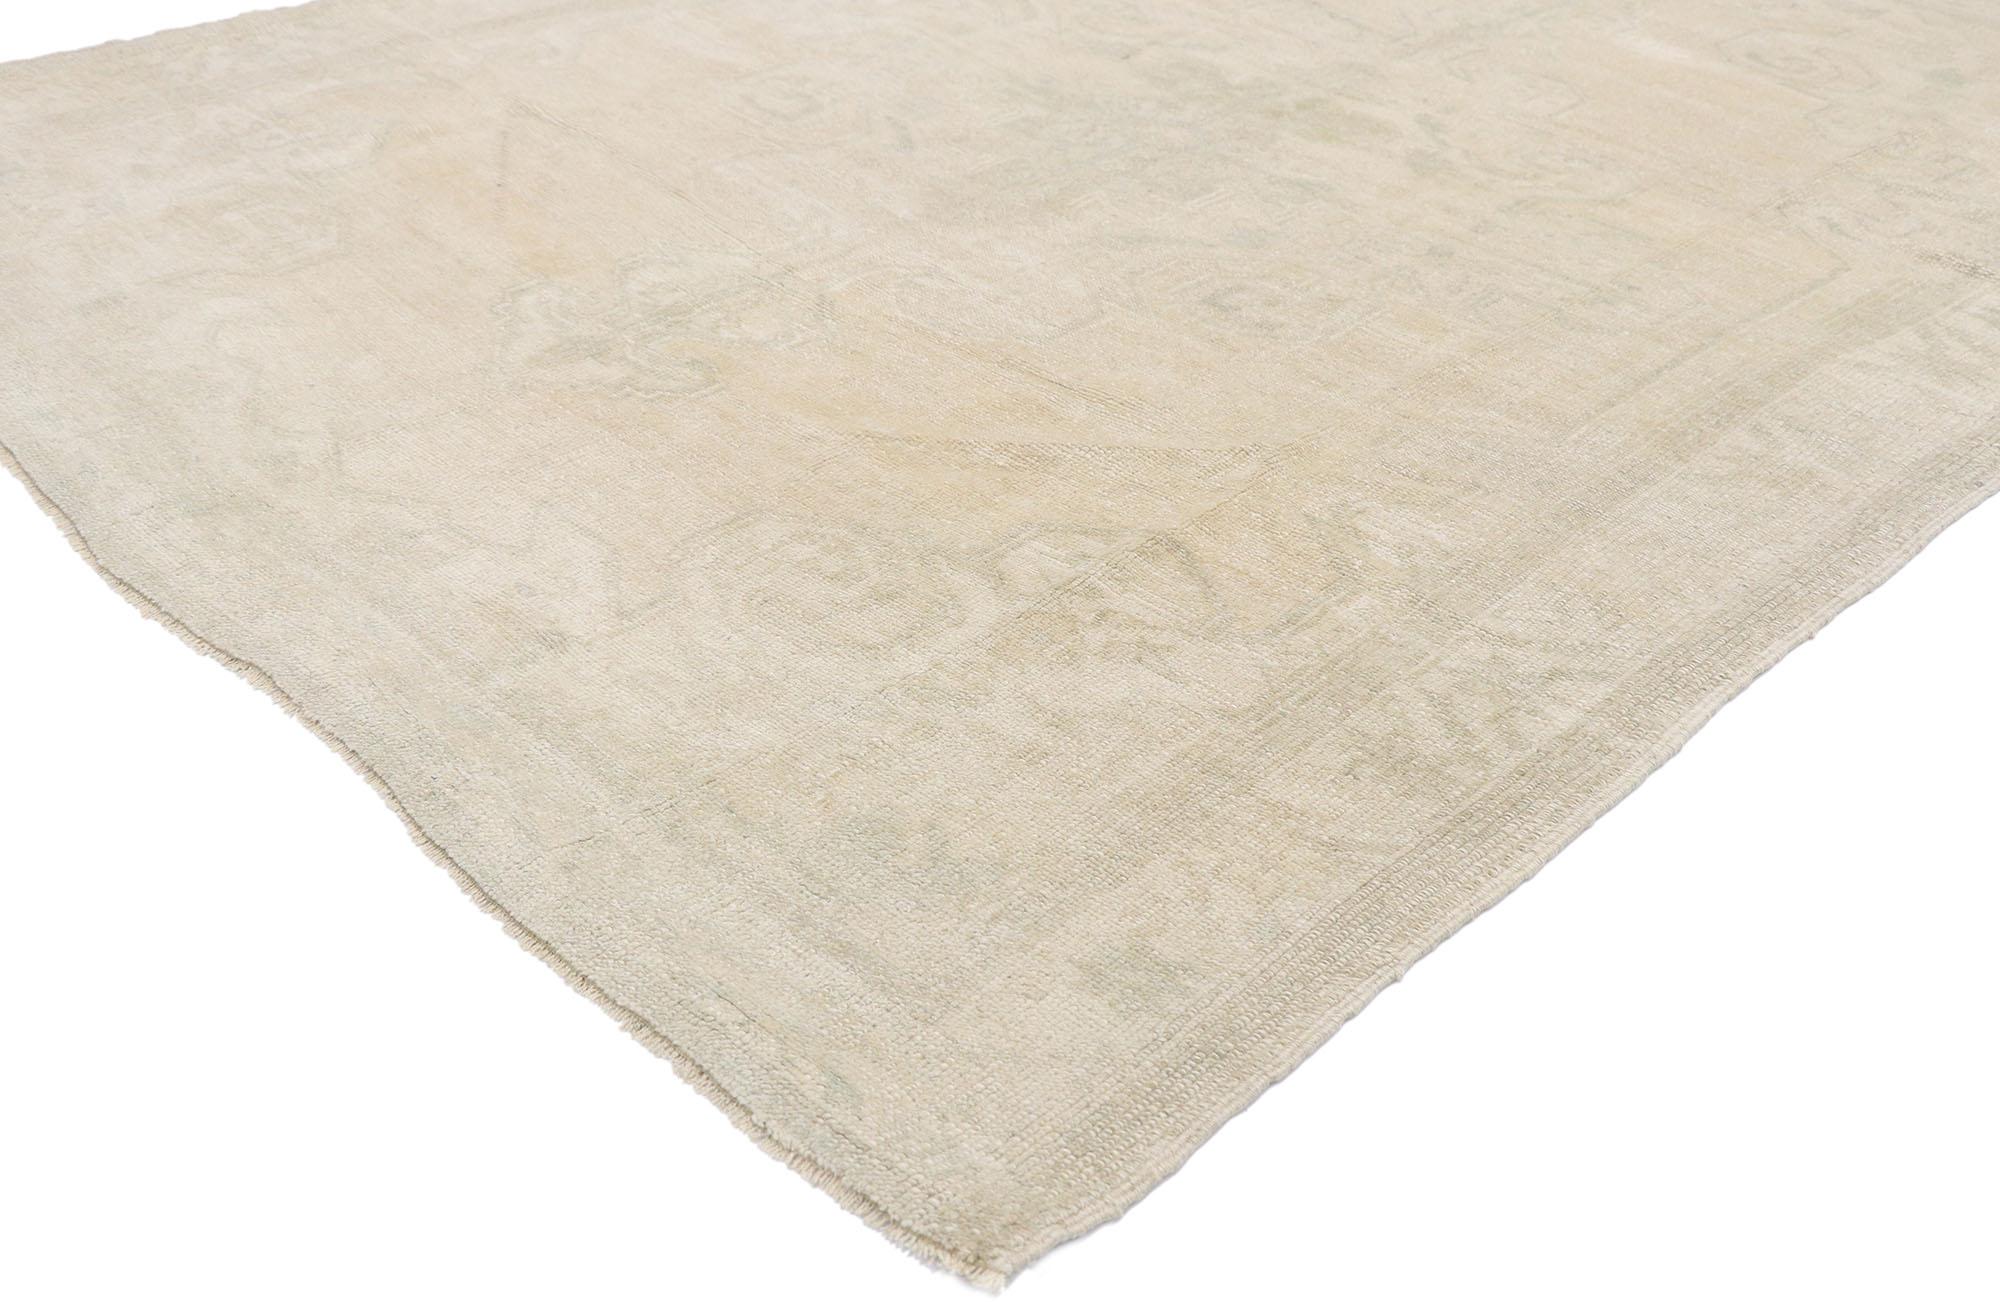 53558 Vintage Turkish oushak rug, 05.02 x 06.11.
With its simplicity, incredible detail and texture, this hand knotted wool vintage Turkish Oushak rug charms with ease. The barely-there geometric pattern and muted colorway woven into this piece